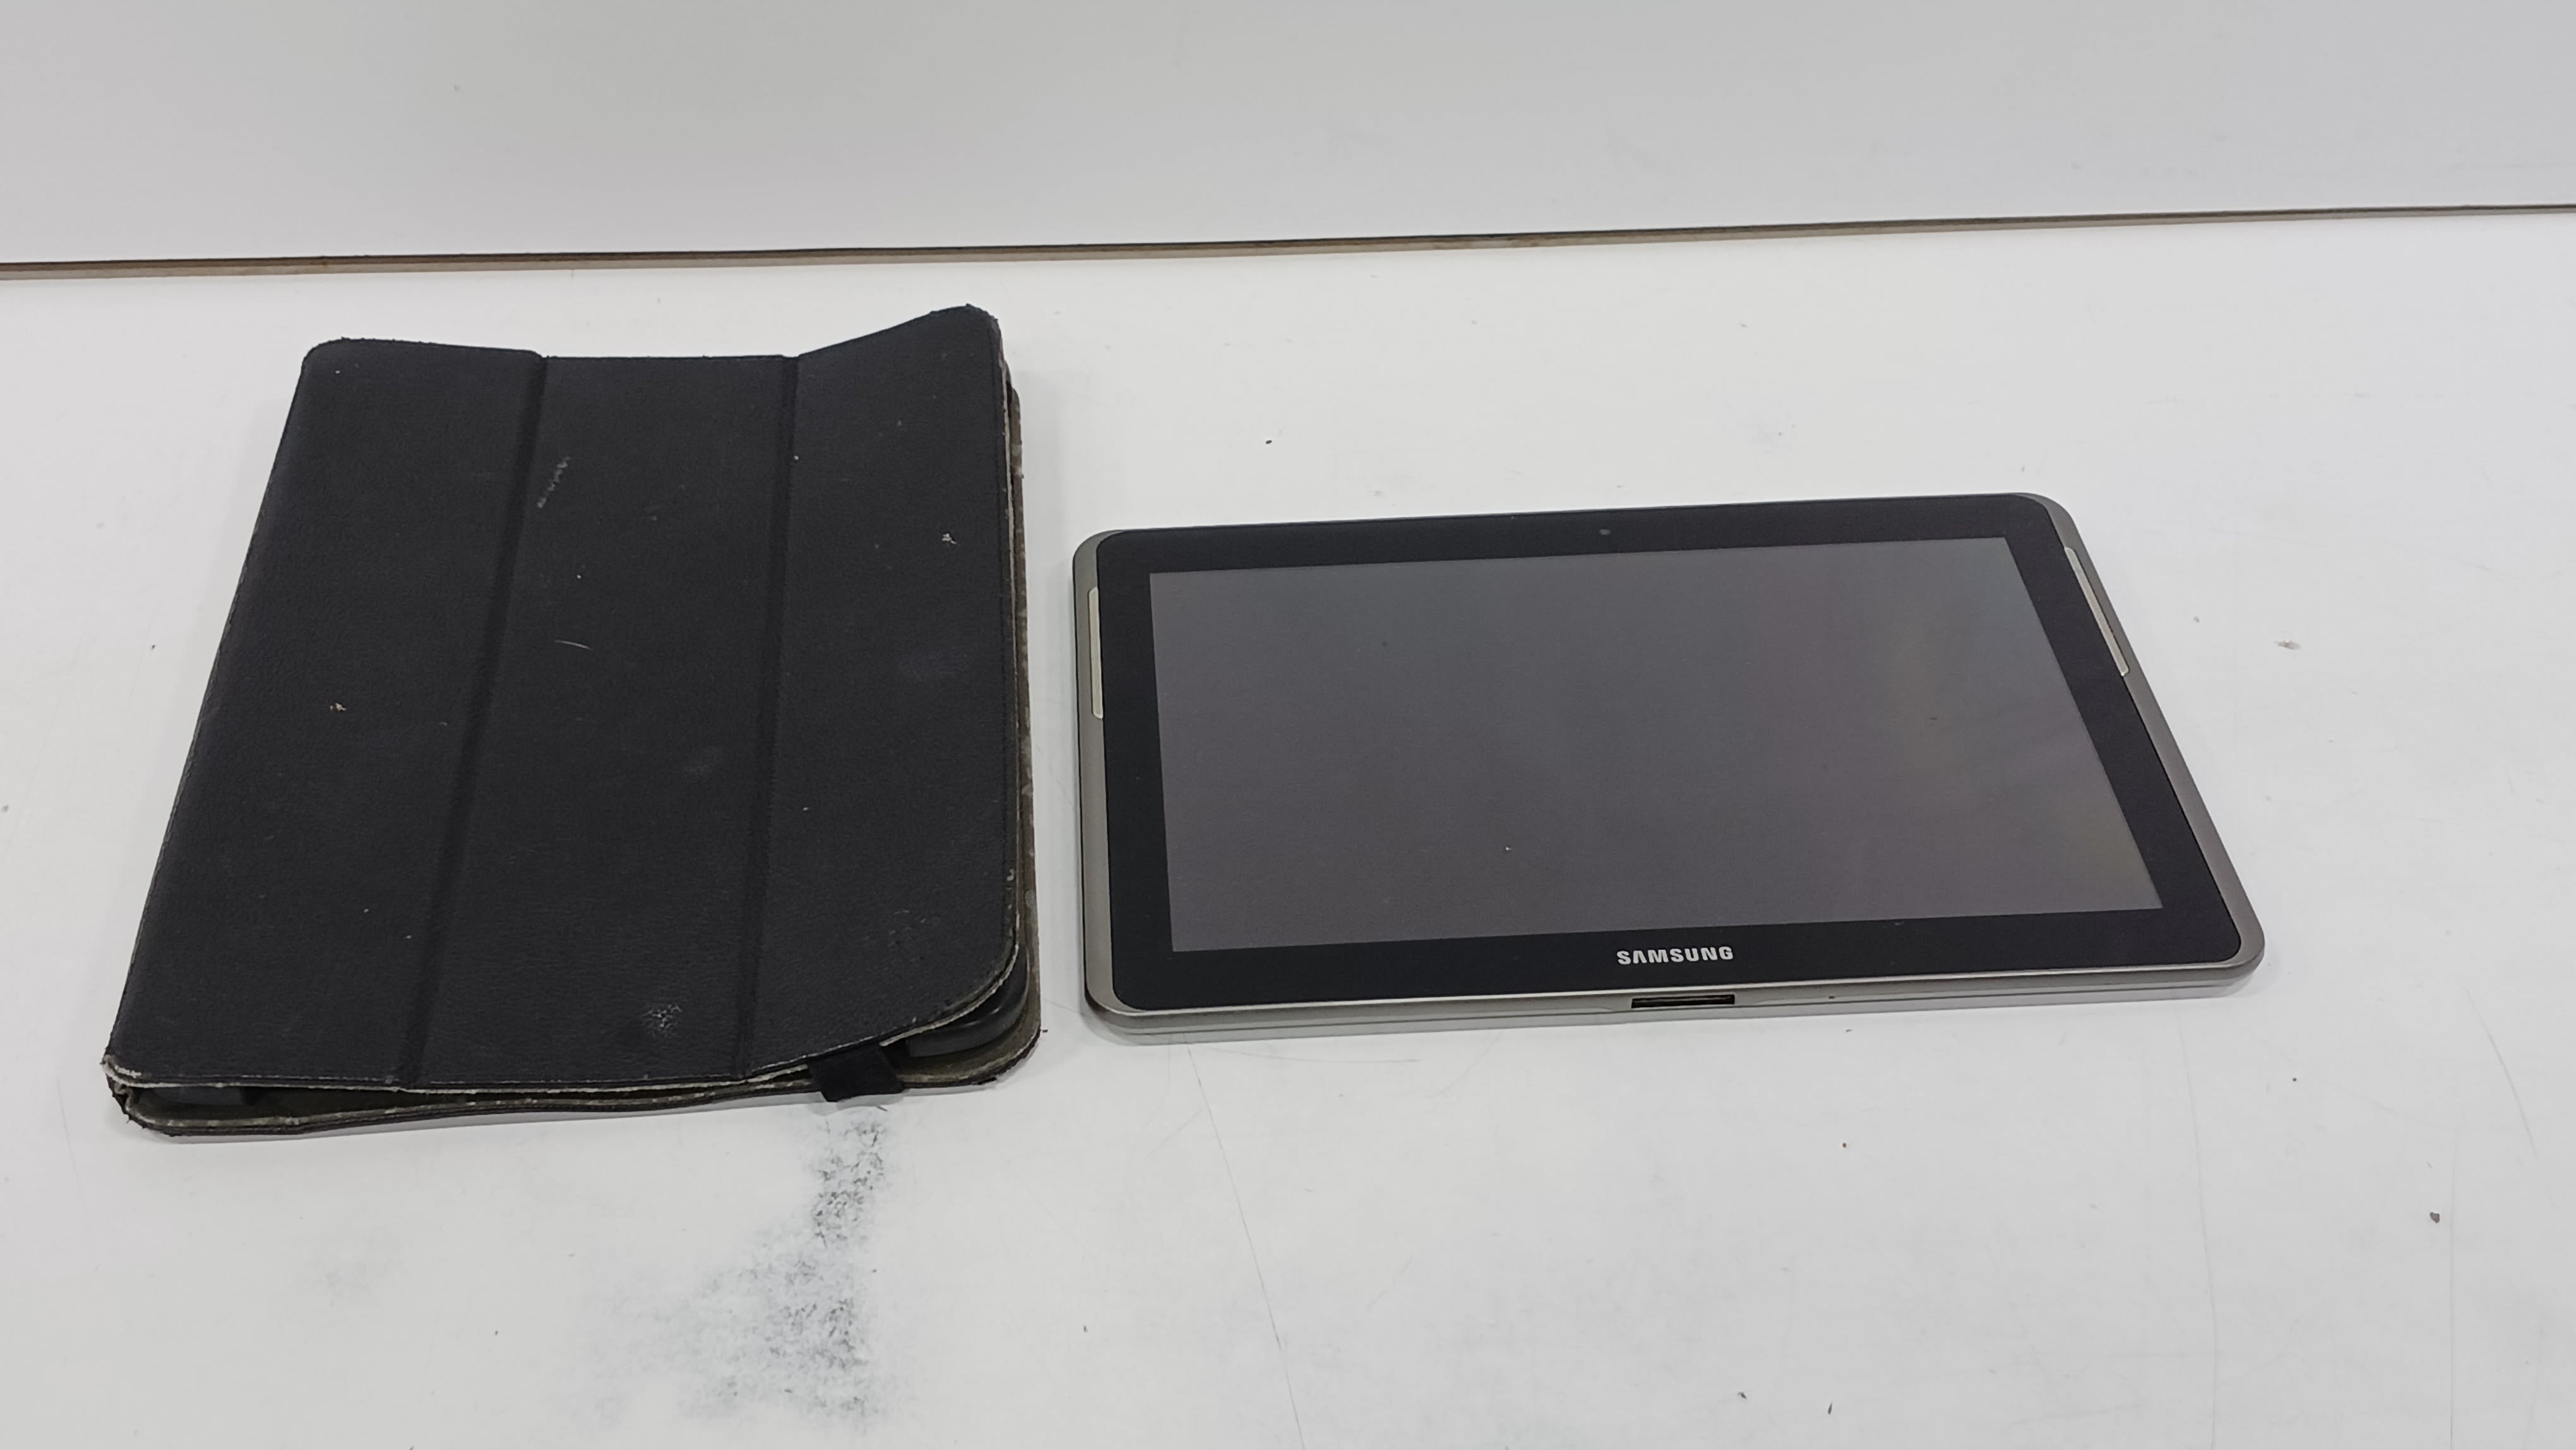 Buy Samsung Galaxy Tab 2 10.1 Tablet With Case for USD 30.00 | GoodwillFinds